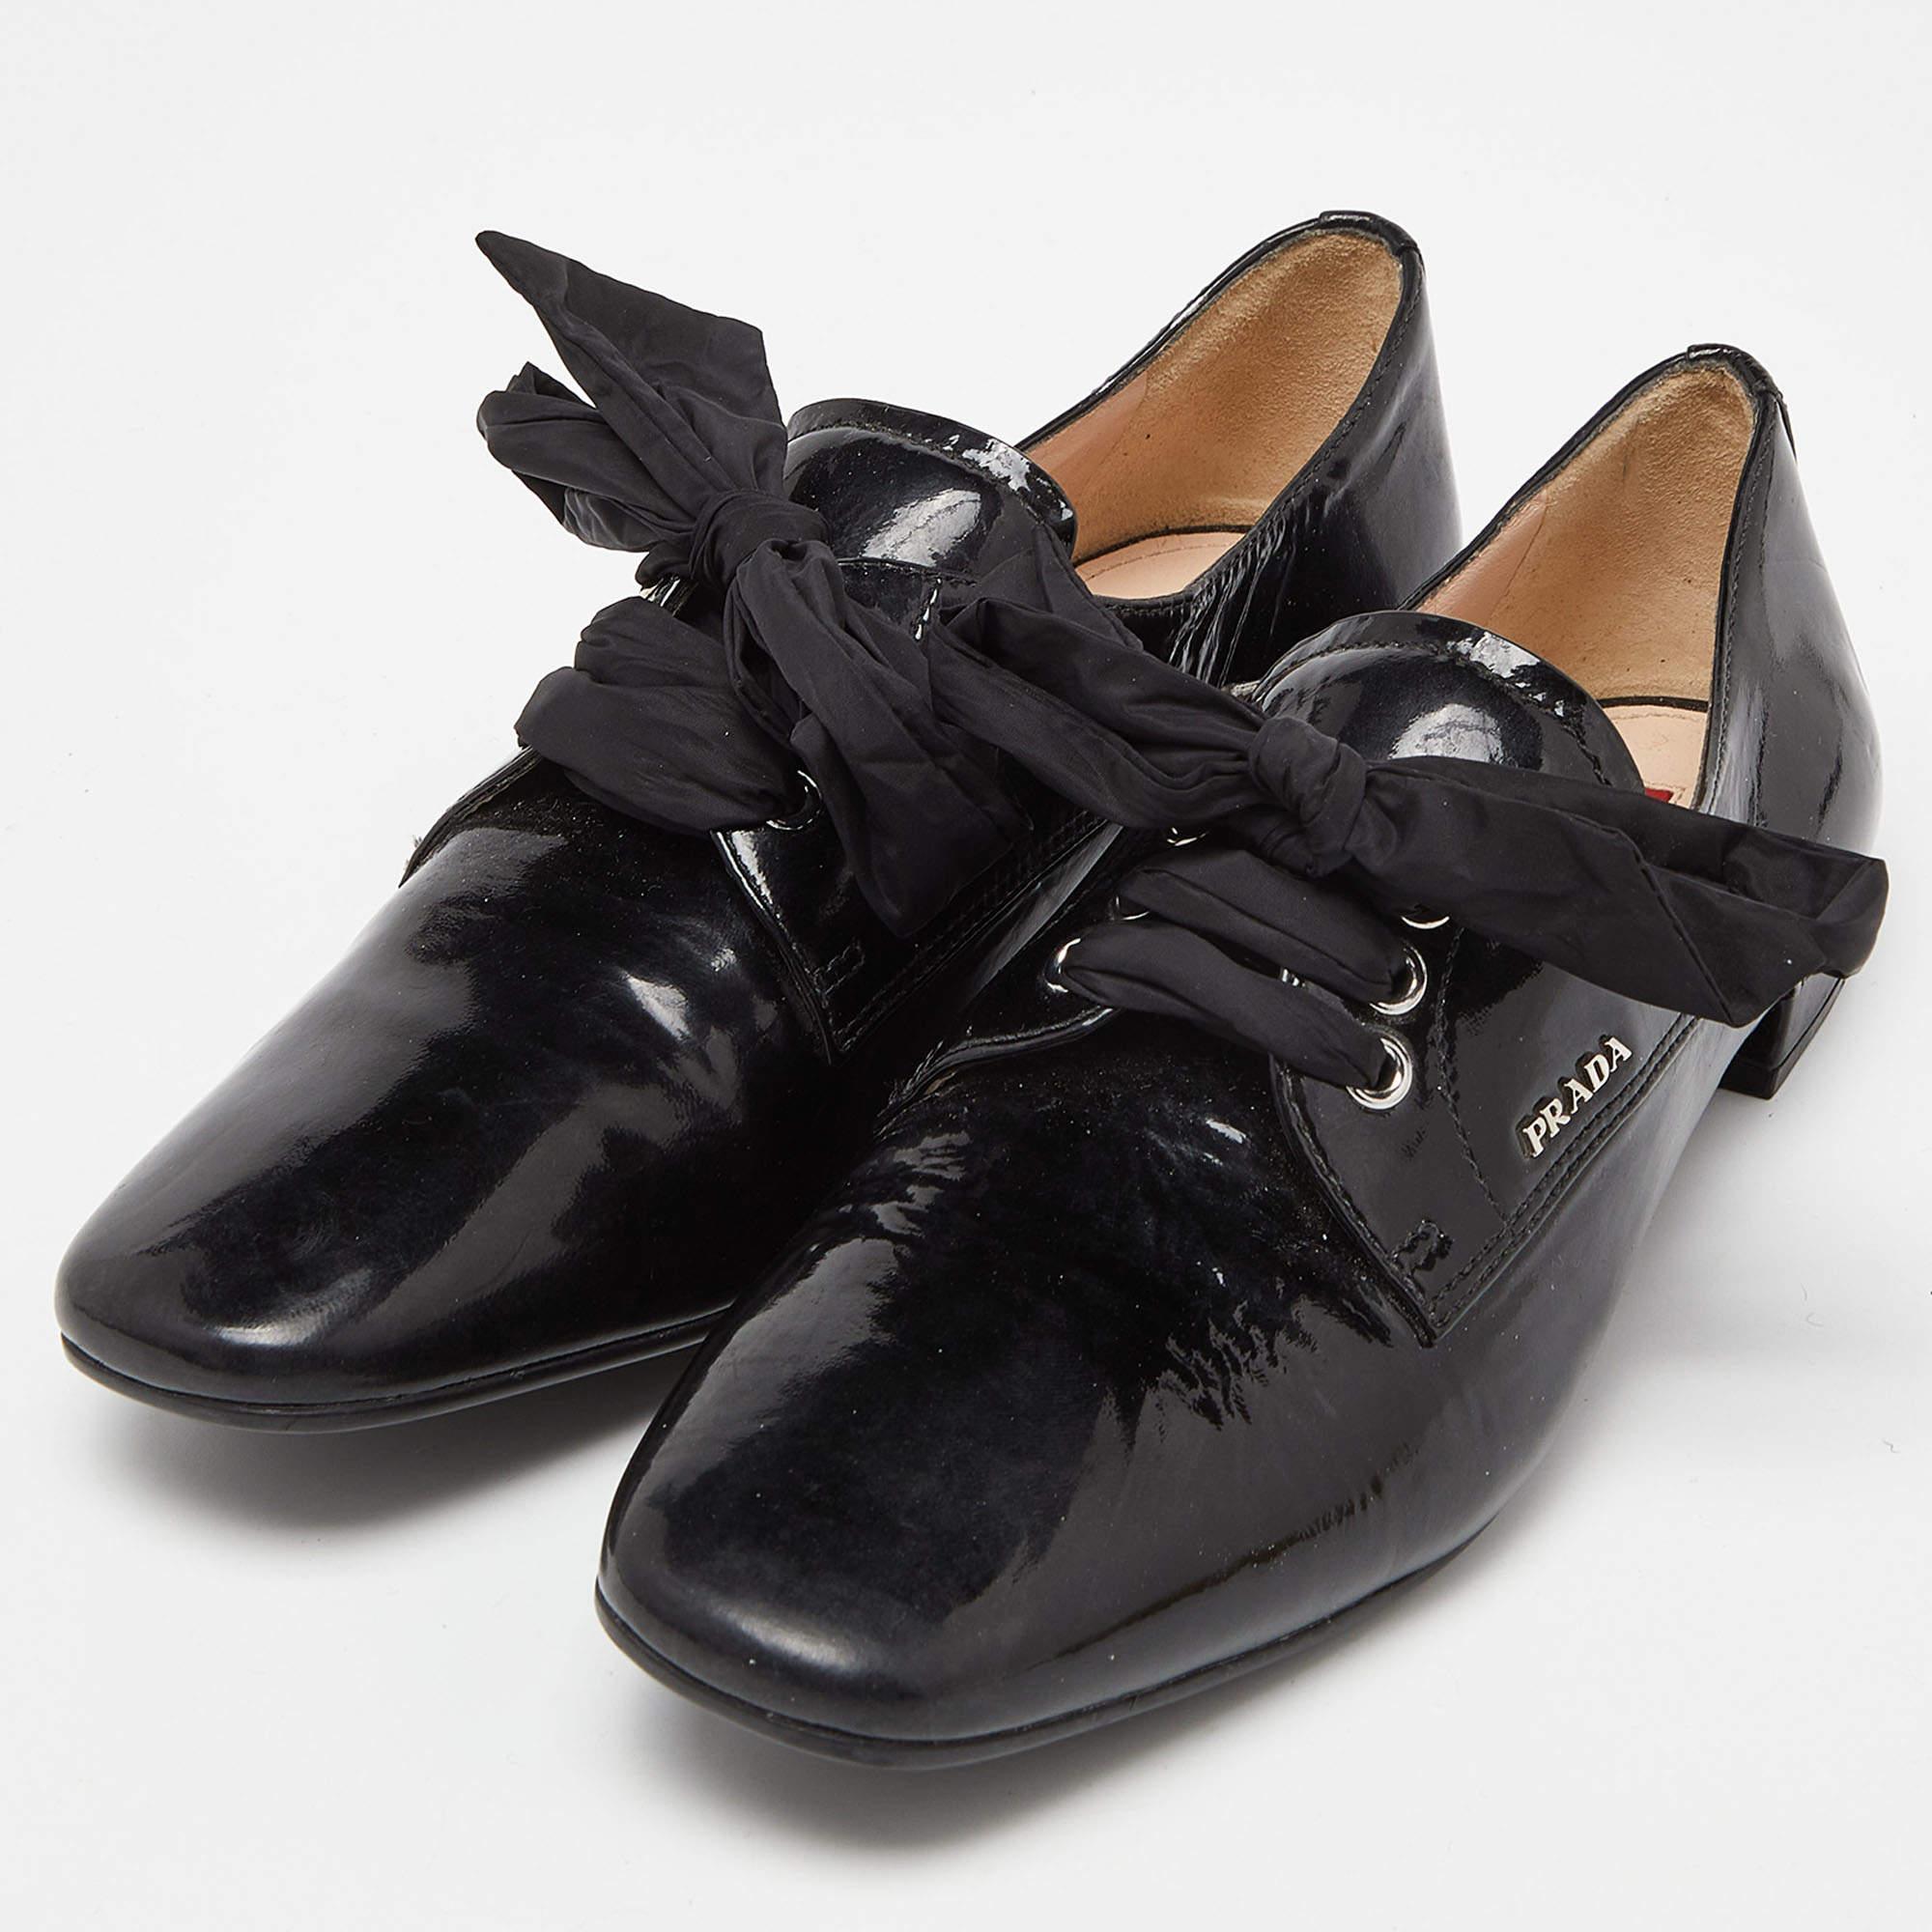 Give your outfit a luxe update with this pair of Prada derby shoes. They are sewn perfectly to help you make a statement in them for a long time.

